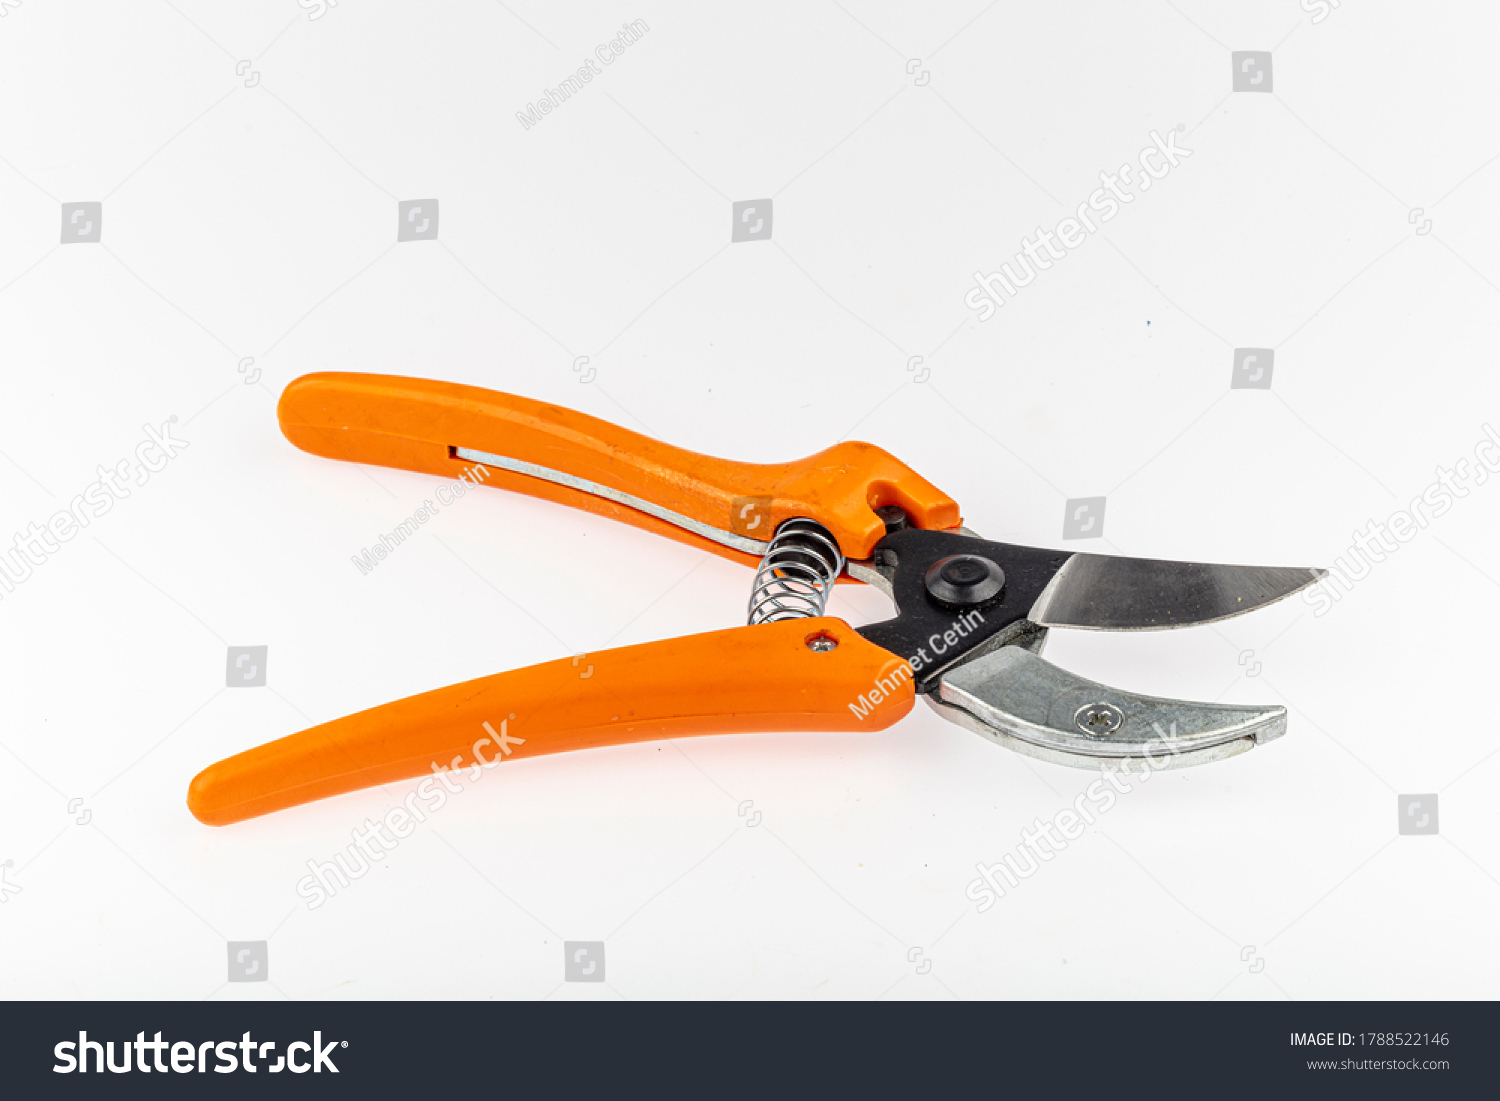 Garden secateurs. Pruning Shears isolated on white background. #1788522146